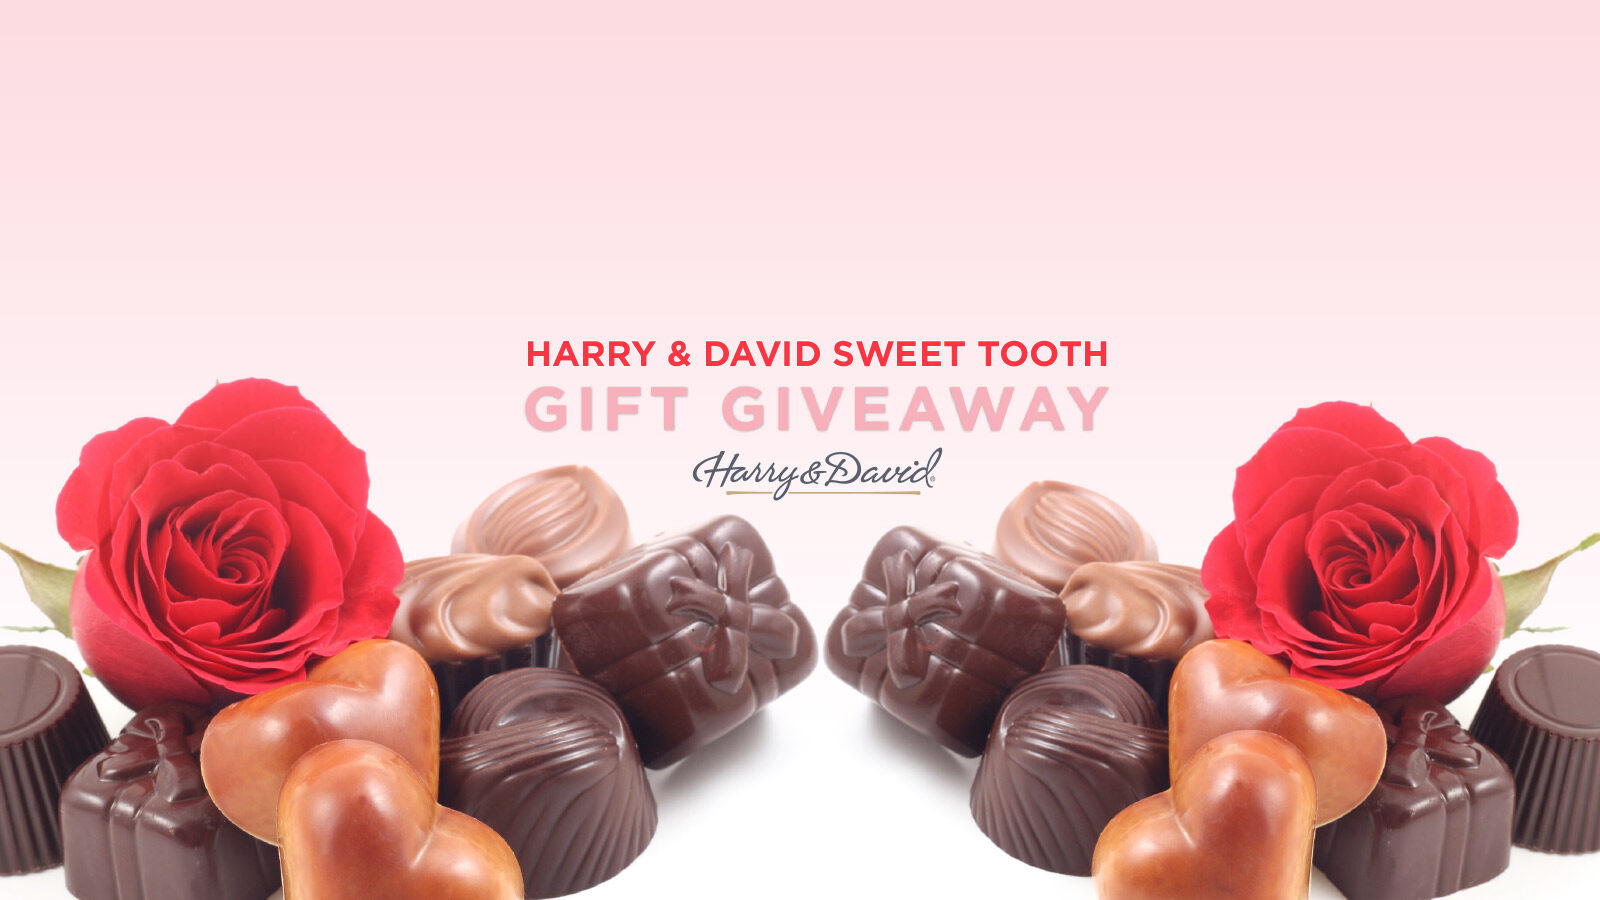 Harry & David Sweet Tooth Gift Giveaway